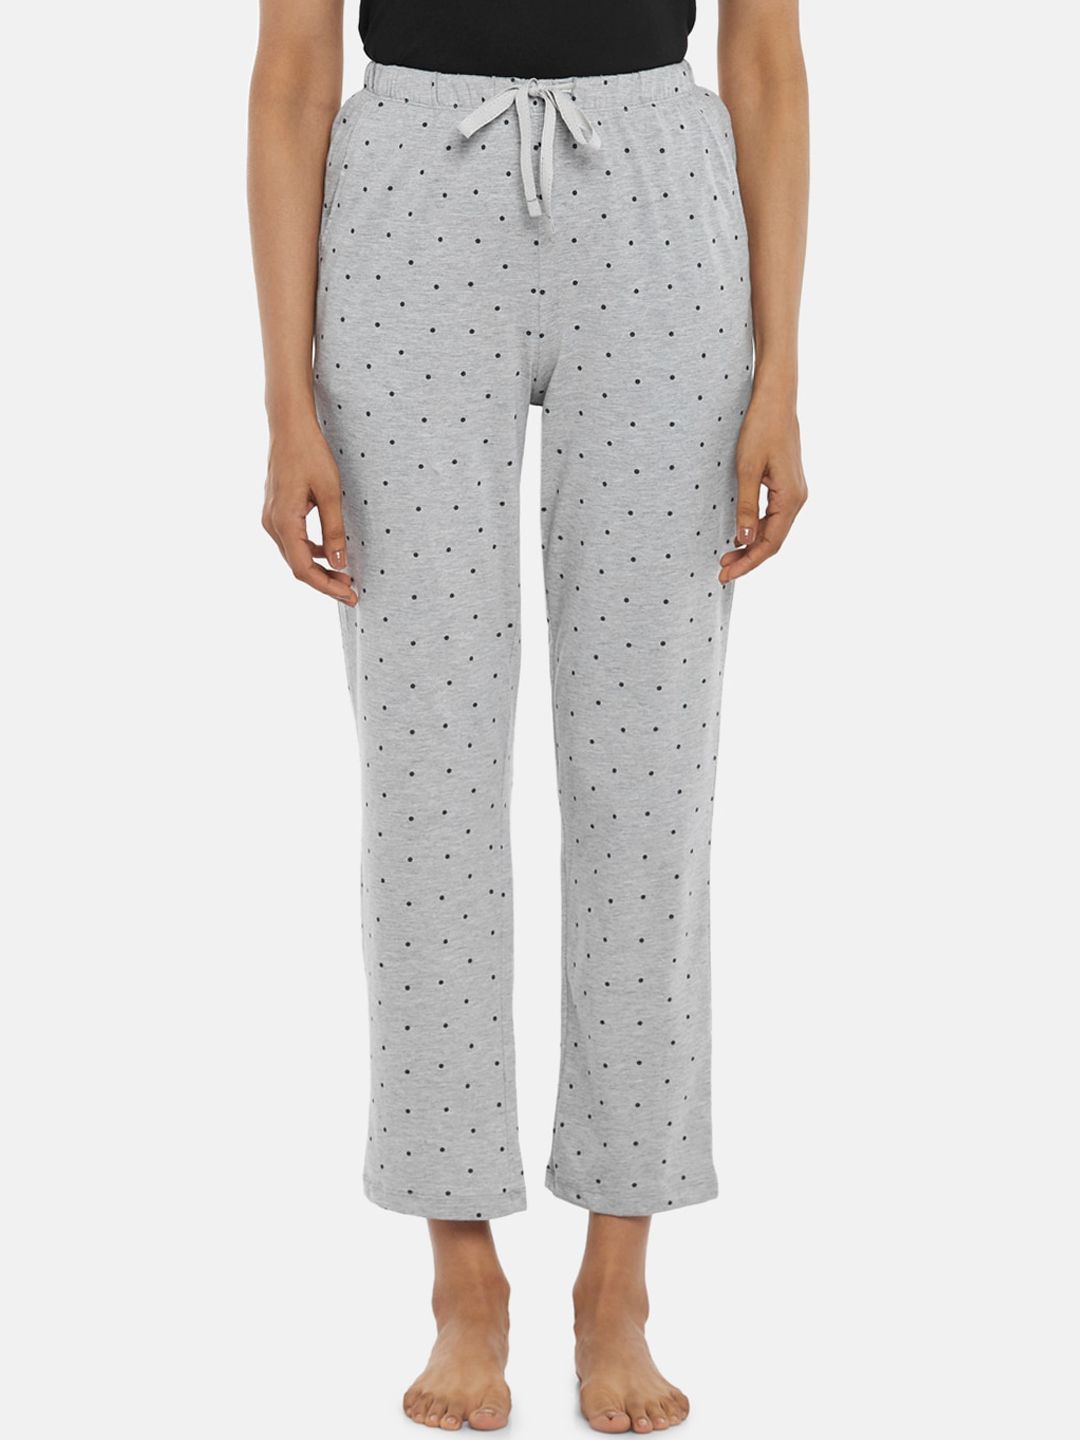 Dreamz by Pantaloons Women Grey Printed Cotton Lounge Pants Price in India